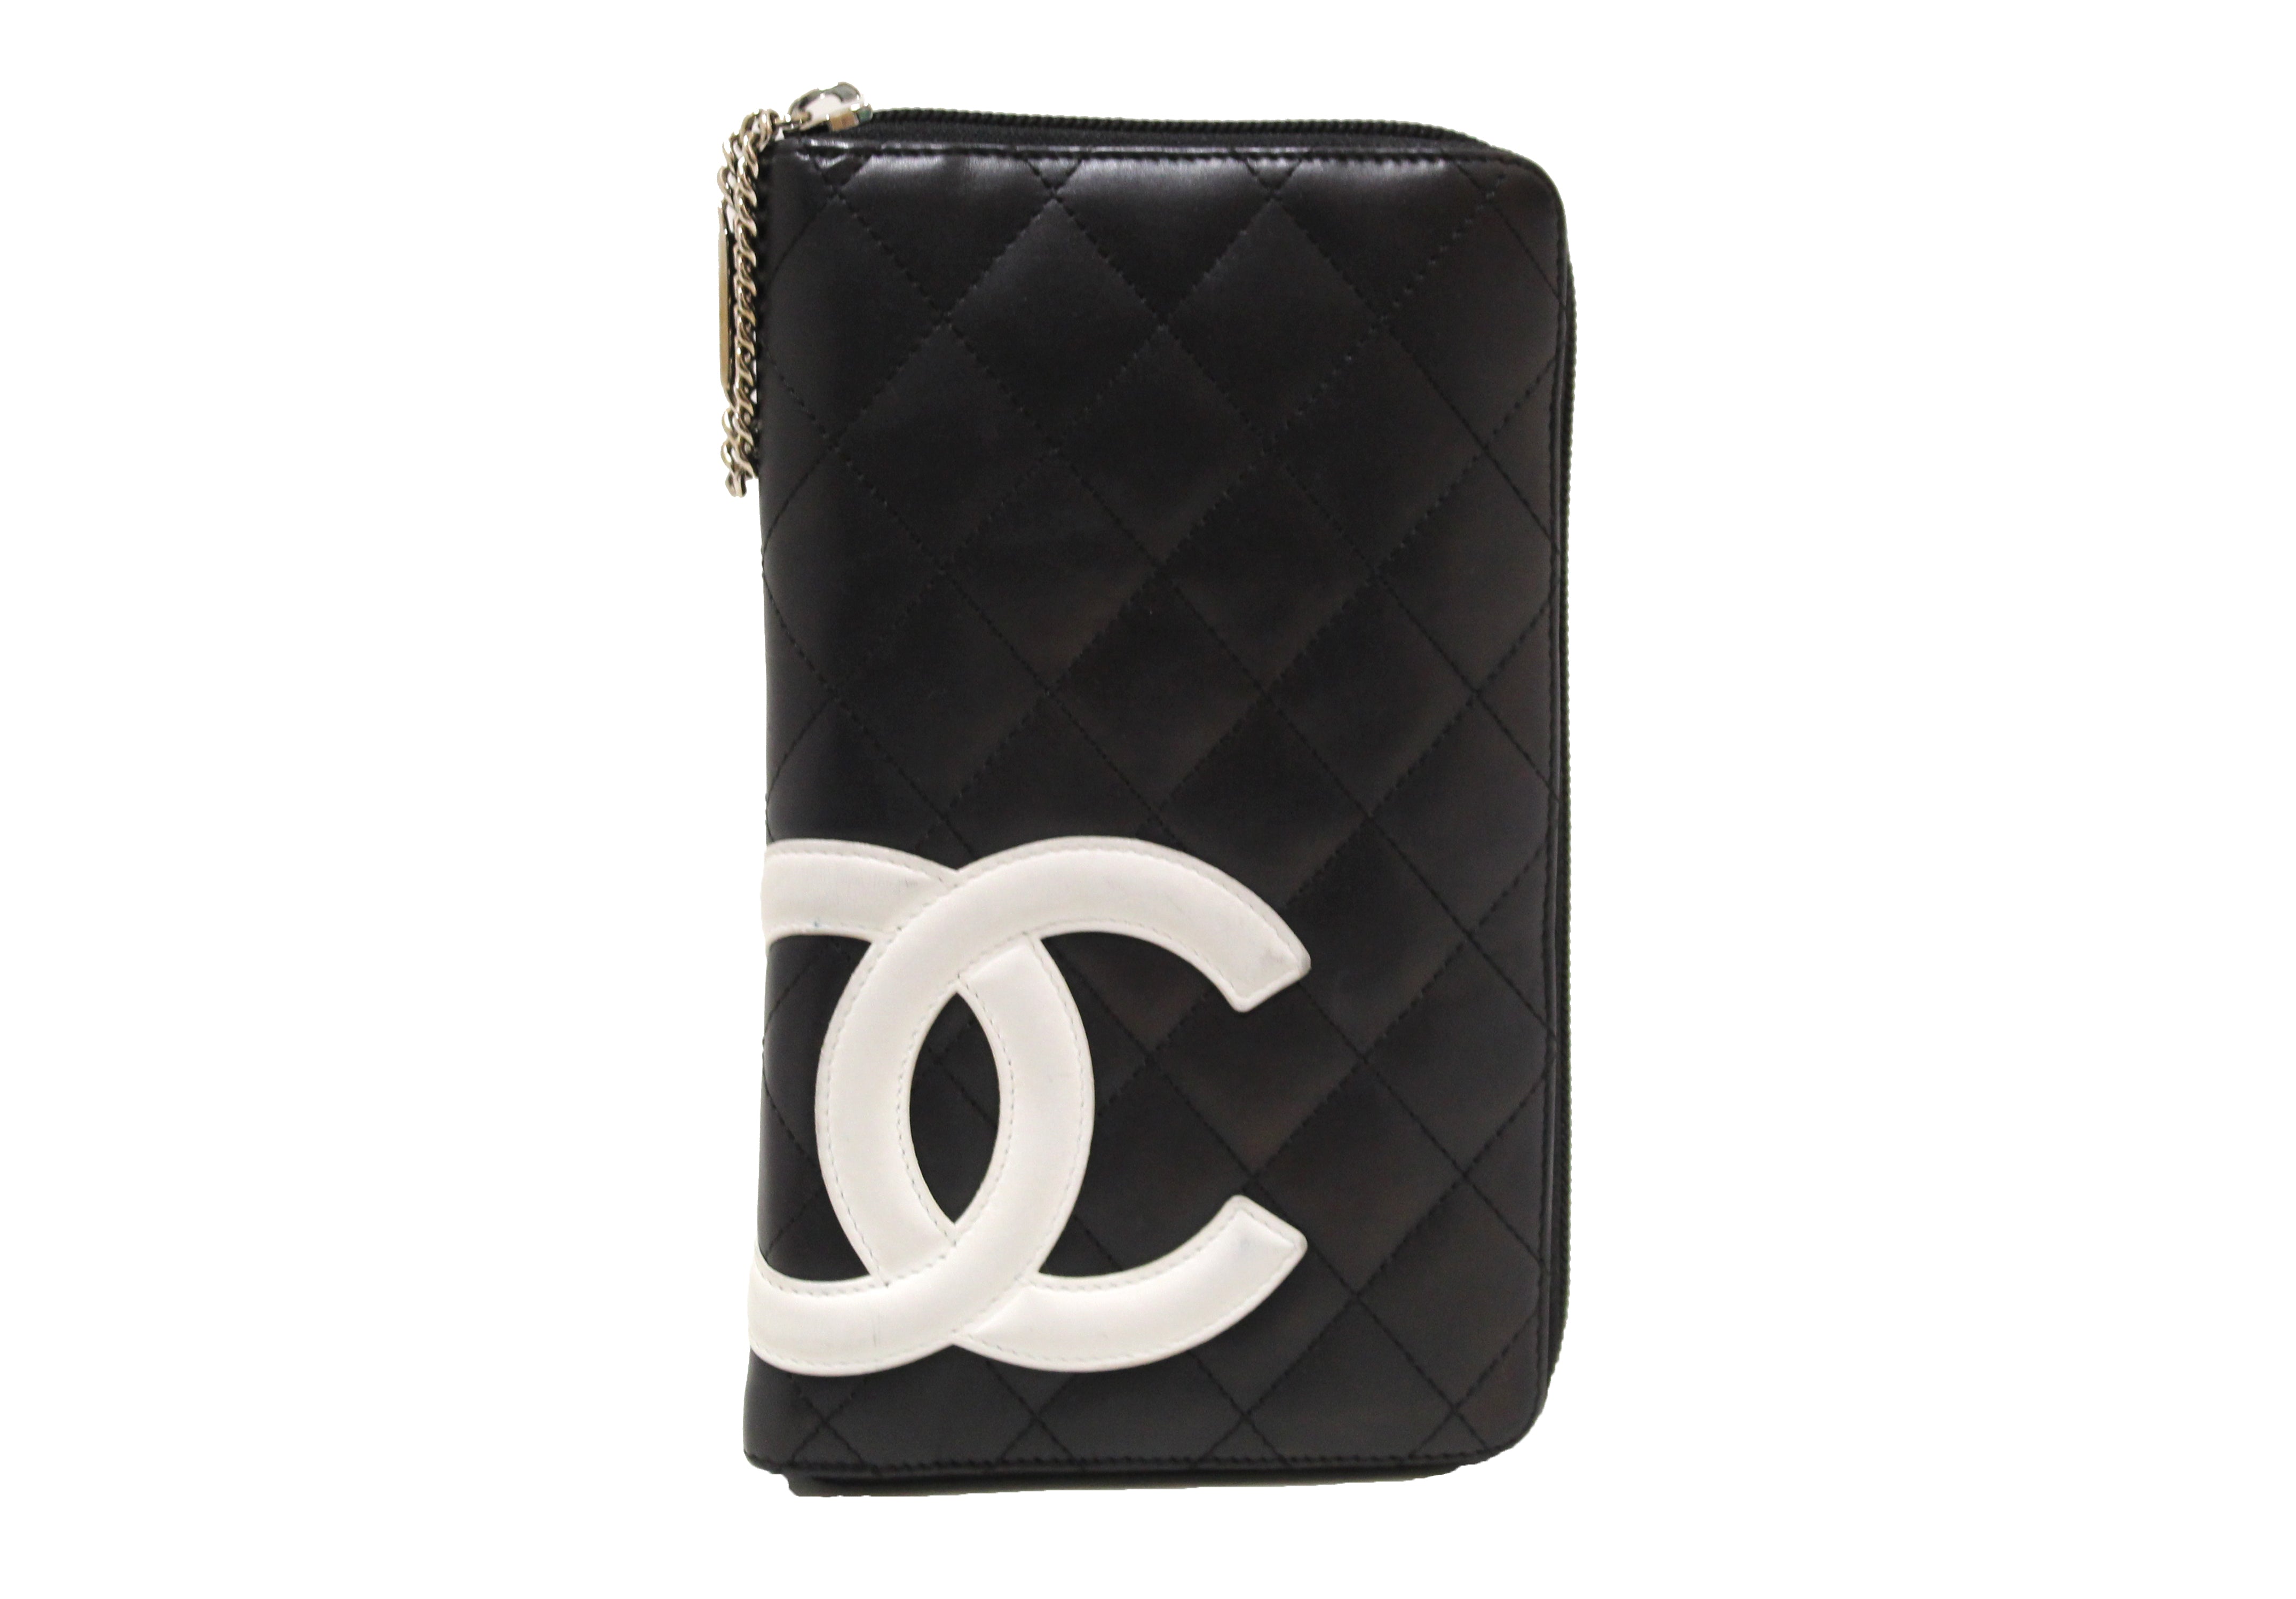 Sell Chanel Cambon Wallet - Black